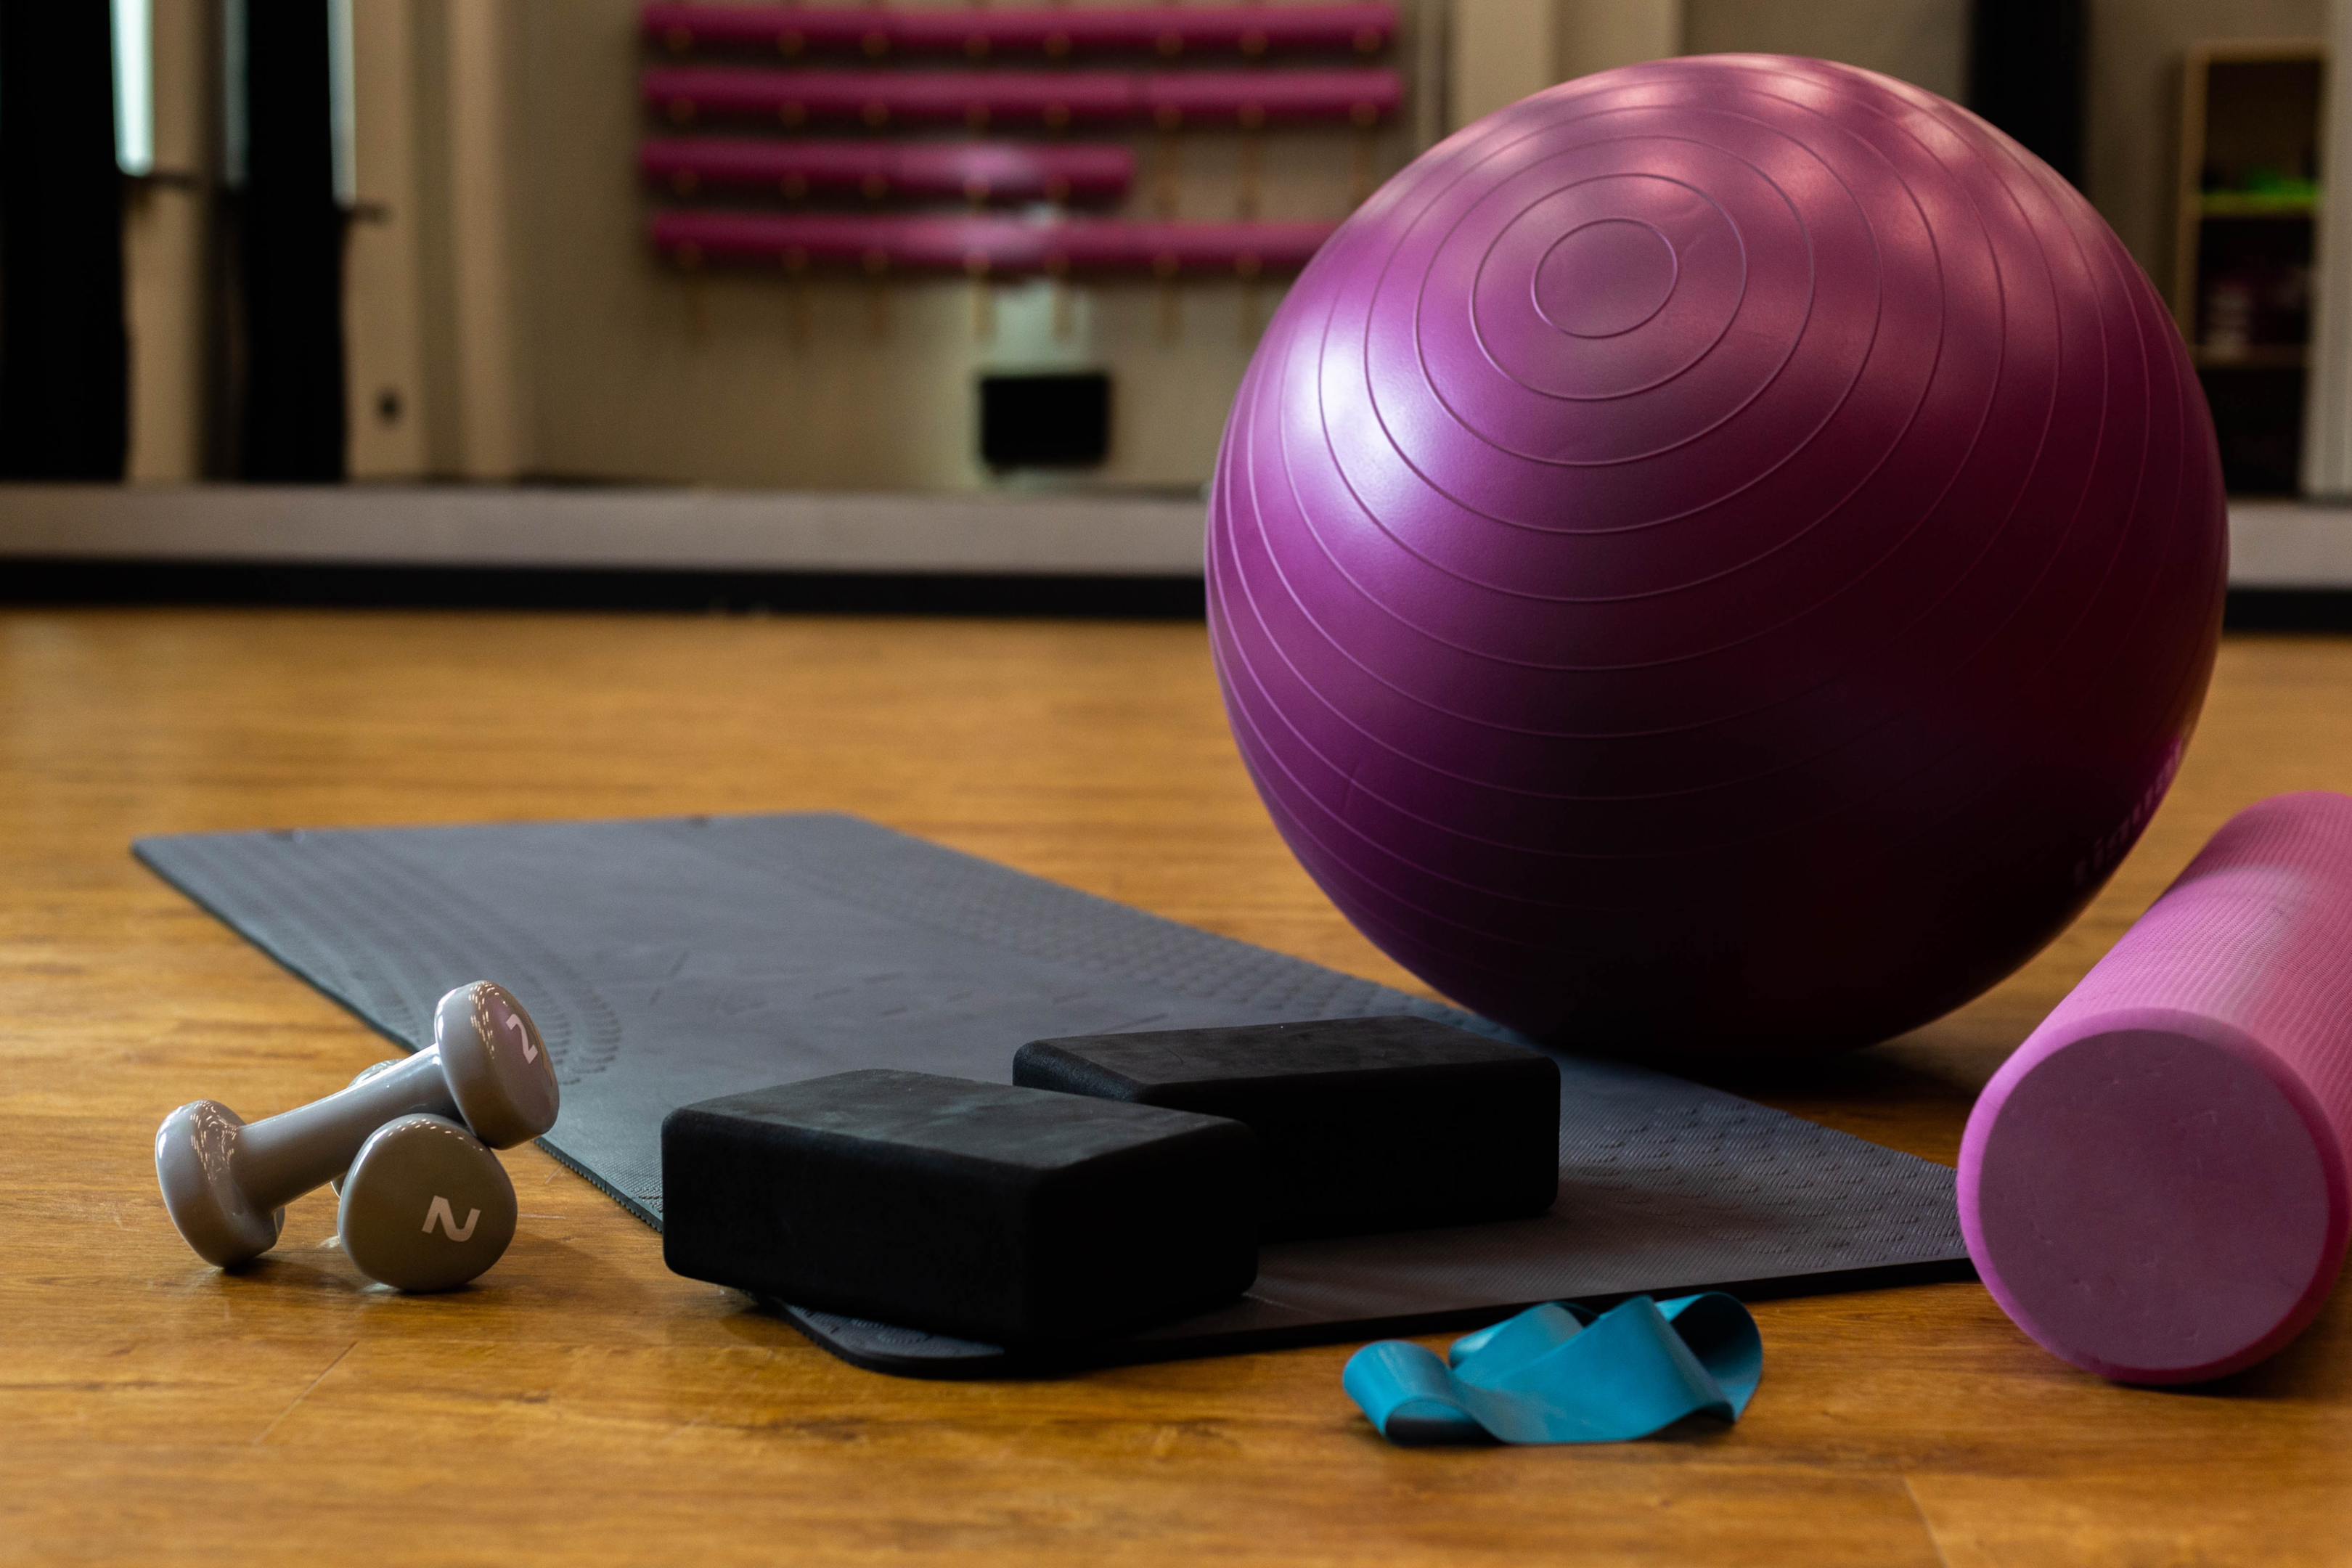 Image of weights, balls, bands or other exercise equipment that might be used for physical therapy sessions